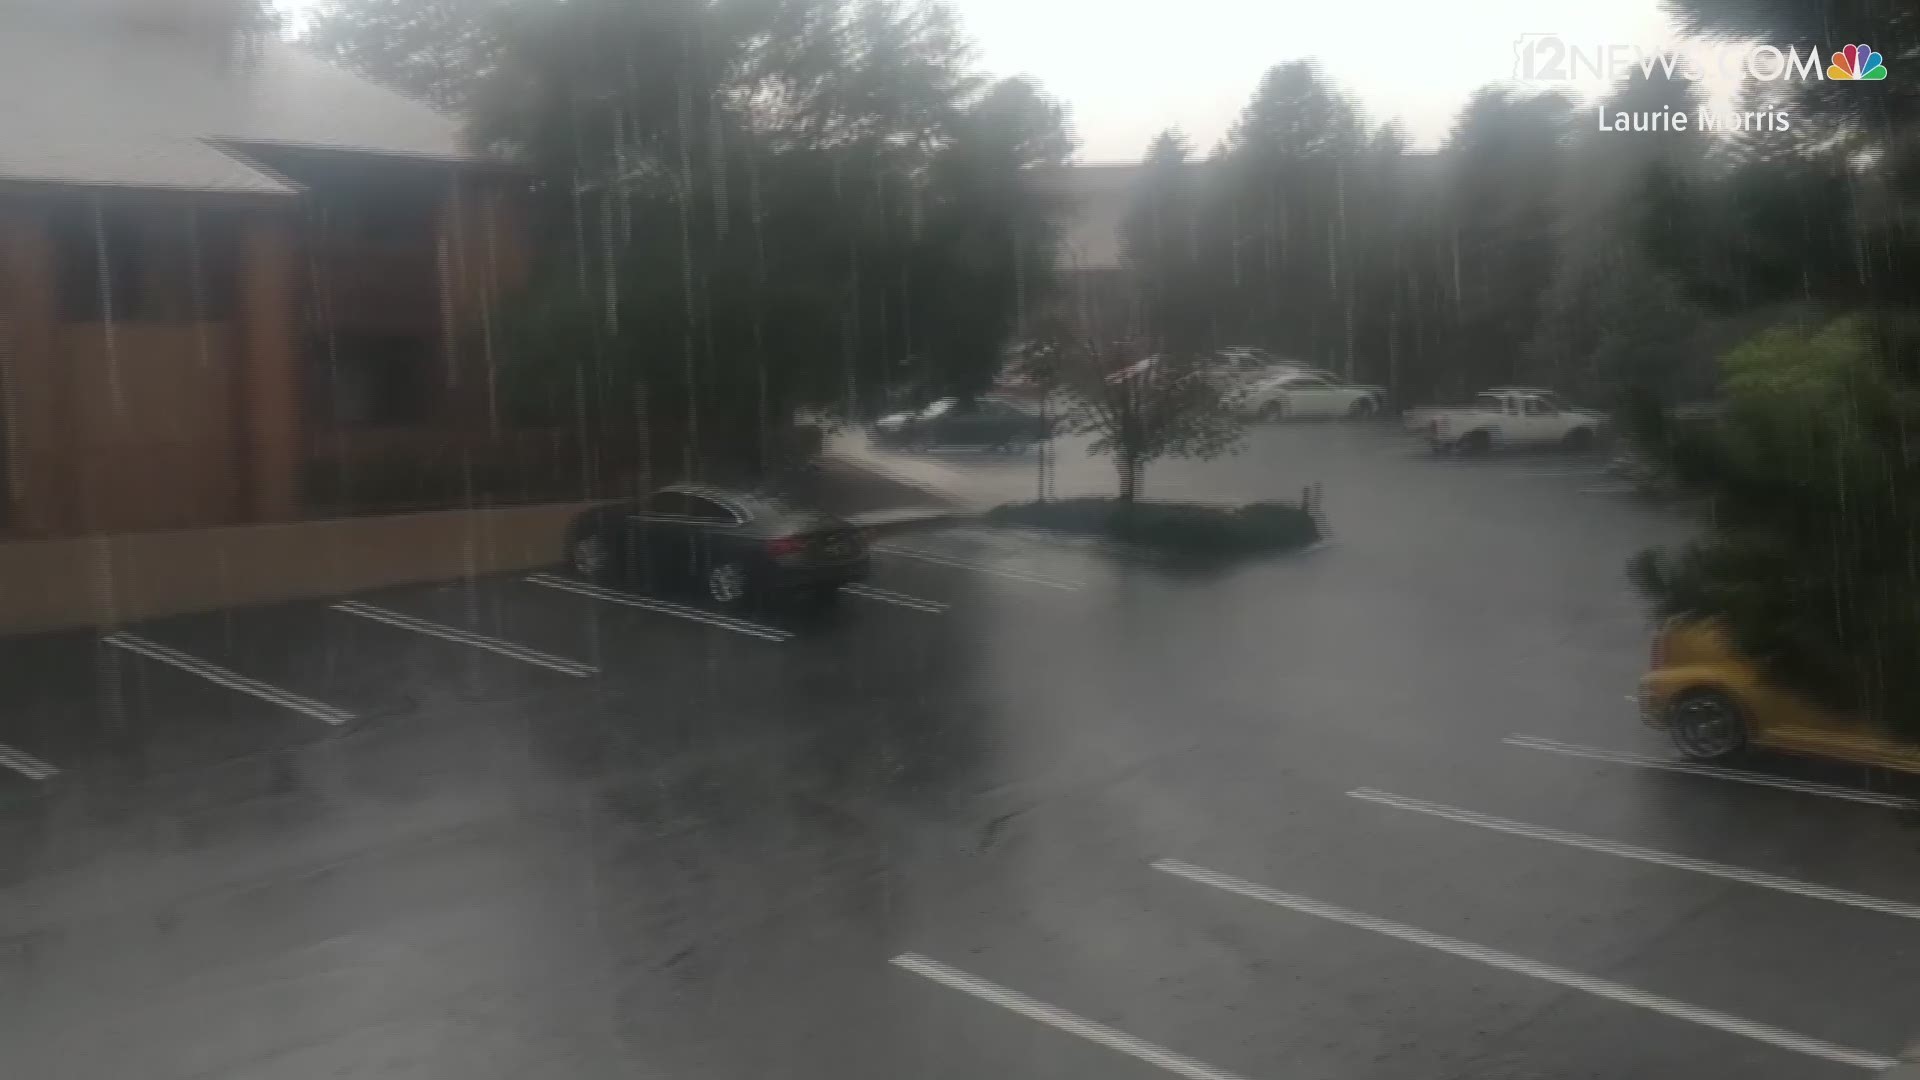 Our 12 News Weather Watchers captured some video of the storms around Flagstaff on Aug. 28, 2019. Some even reported seeing hail in some areas.